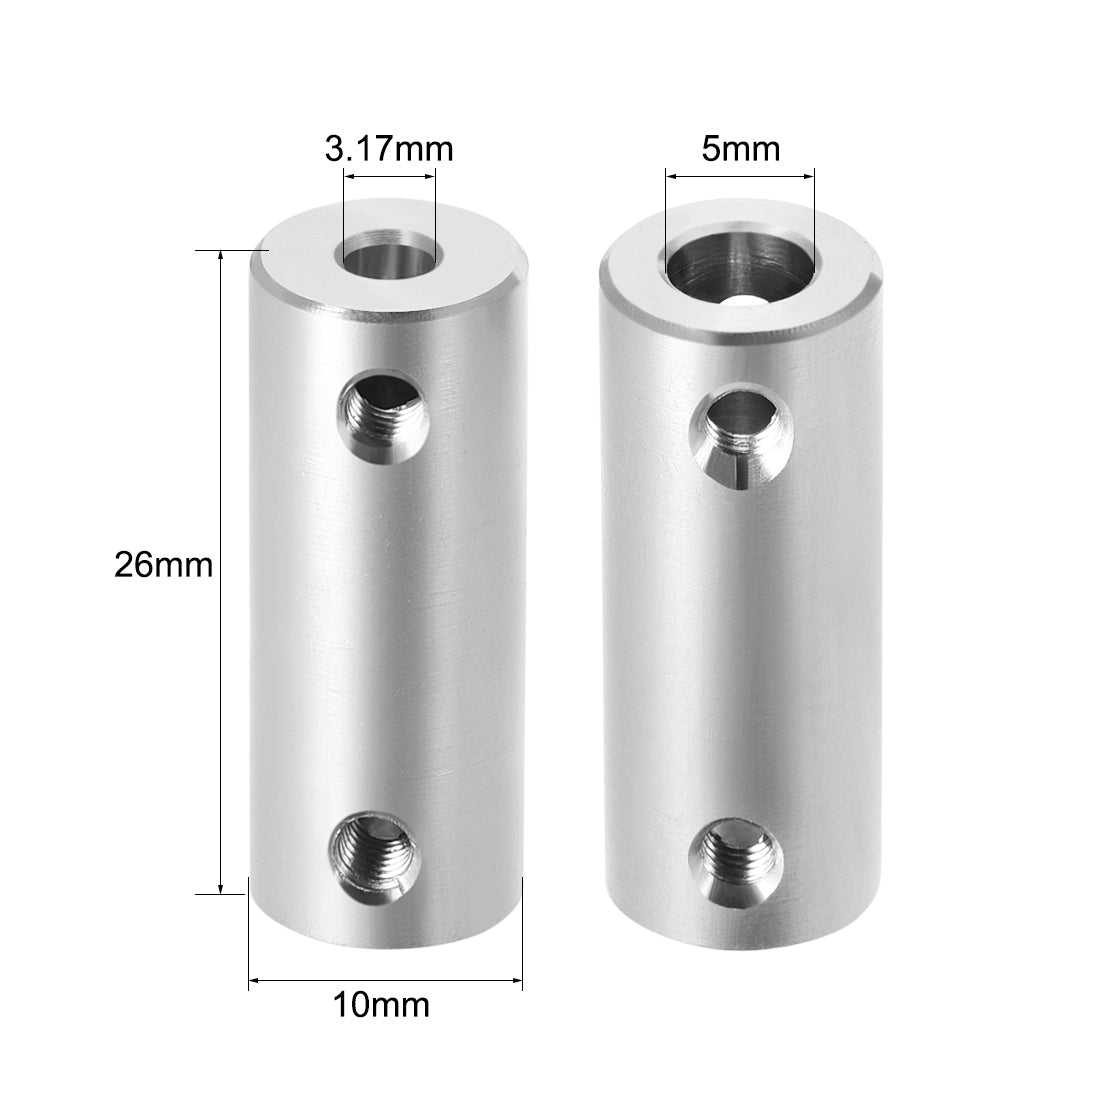 Uxcell Uxcell Shaft Coupling 4mm to 6mm Bore L26xD12 Robot Motor Wheel Rigid Coupler Connector w Hex Head Spanner